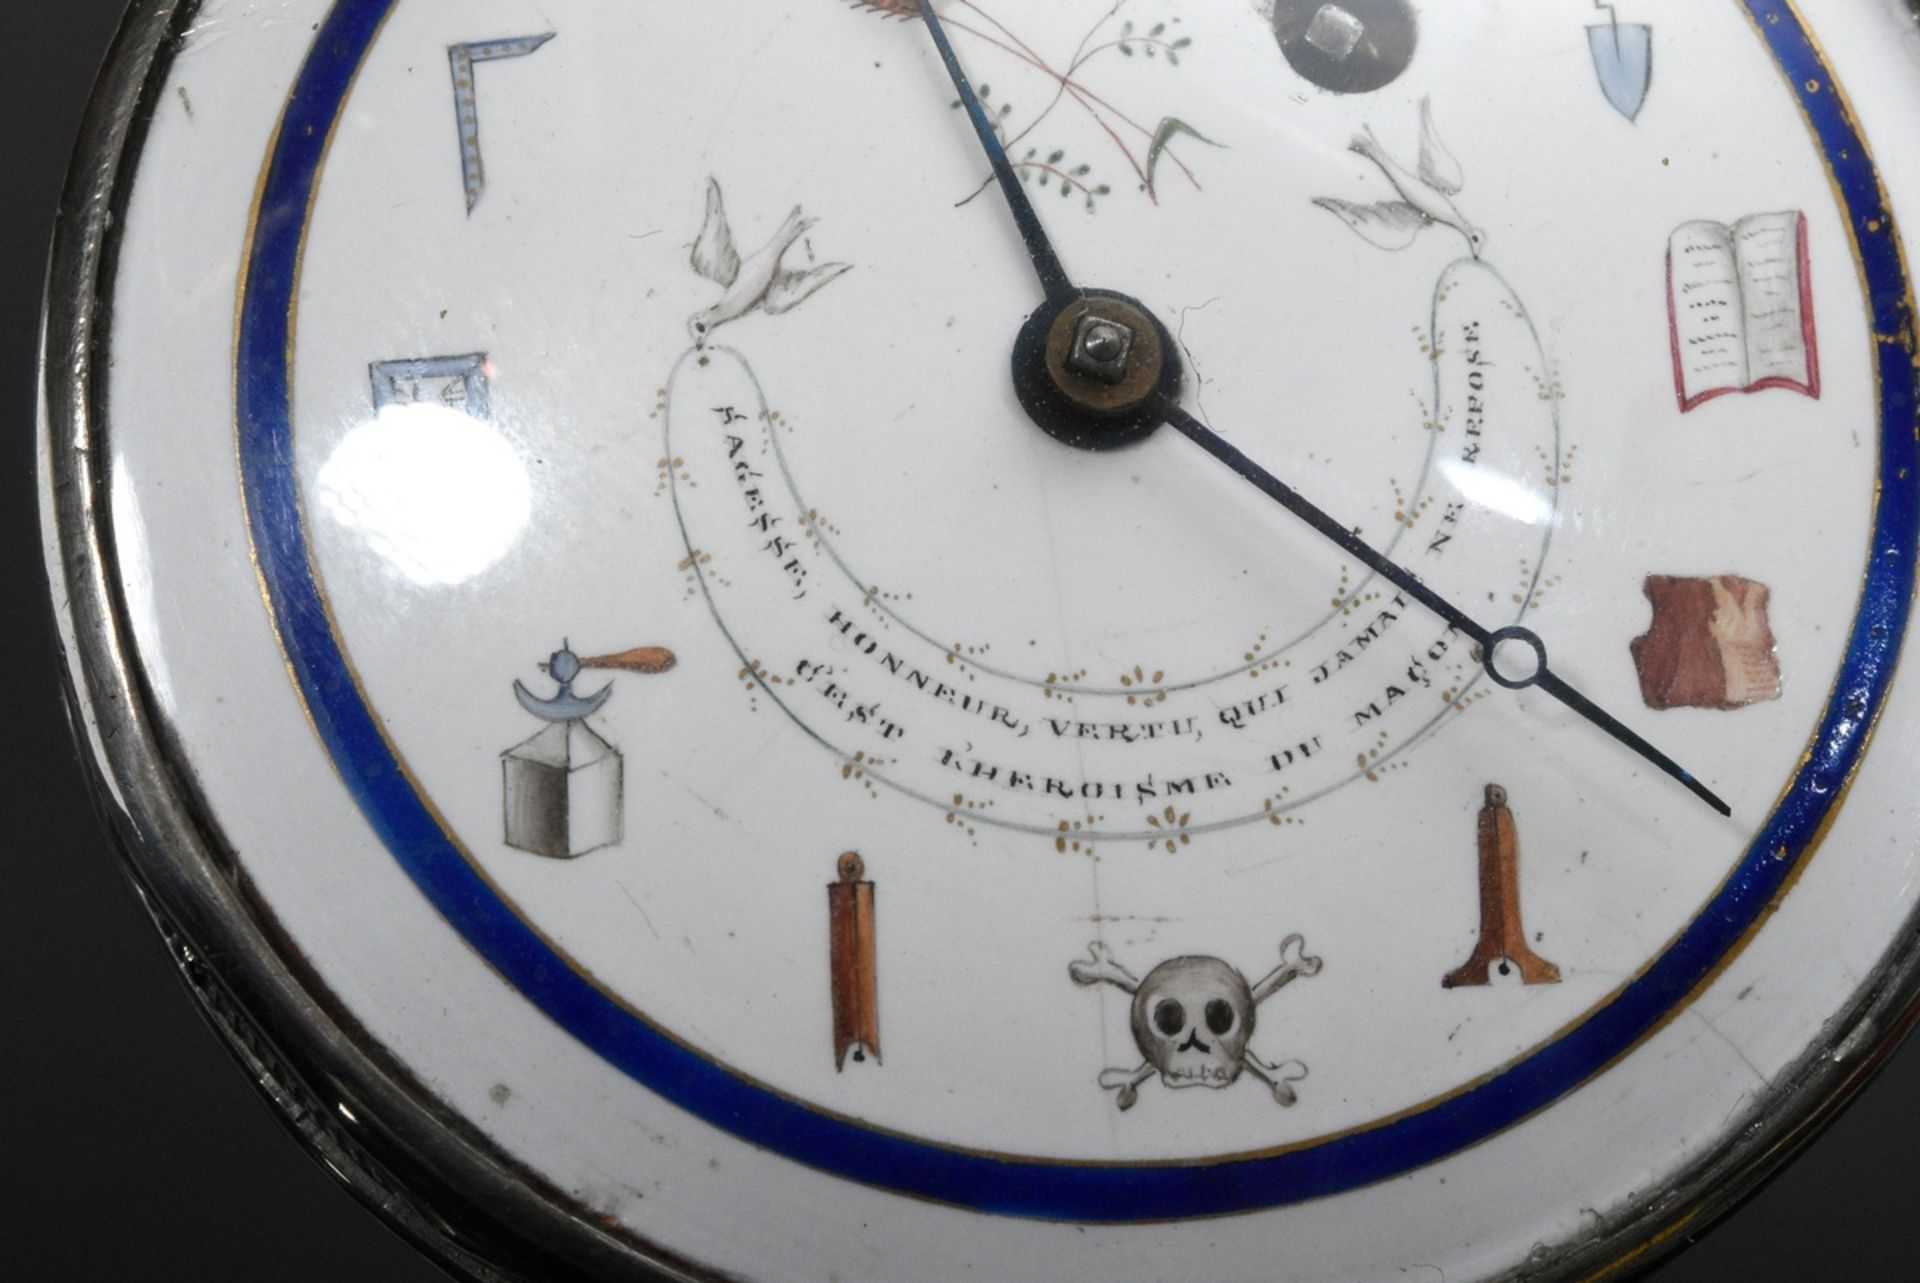 Masonic silver spindle clock, white enamel dial with symbols as indices and inscription "SAGESSE HO - Image 8 of 8